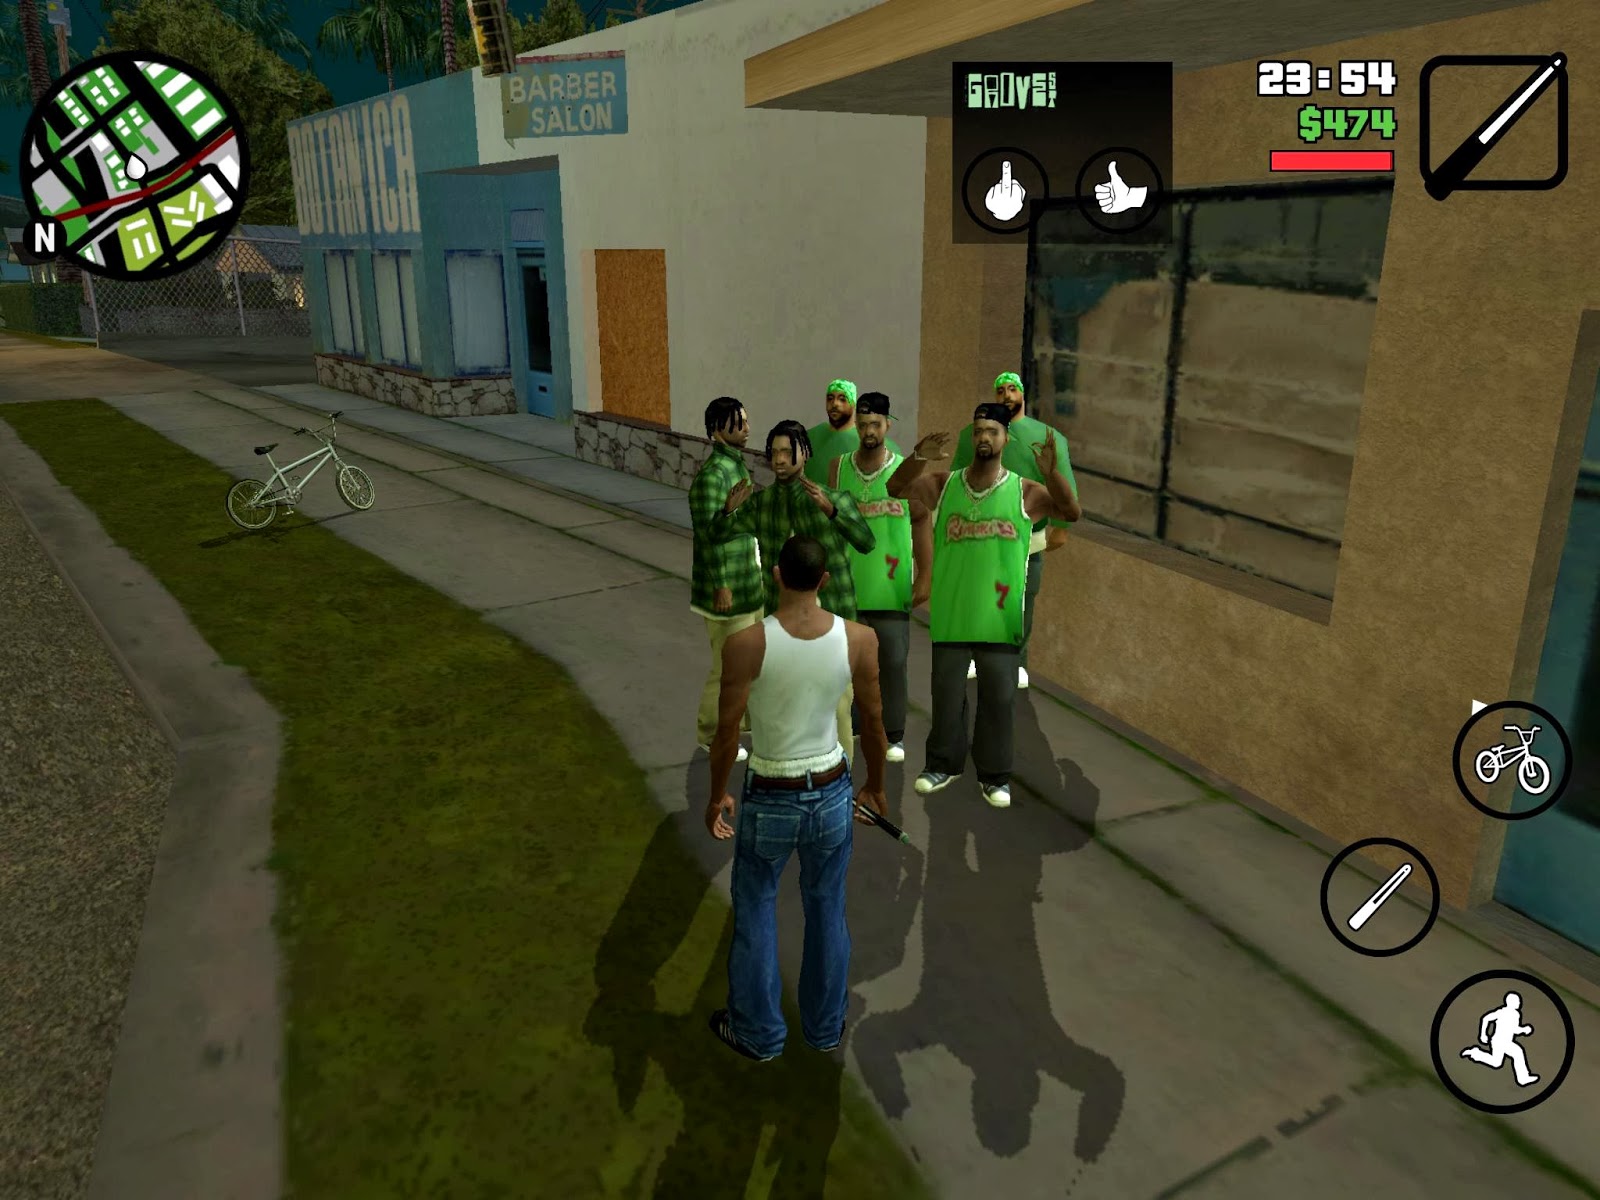 GTA SAN ANDREAS ANDROID CHEAT MOD APK FREE DOWNLOAD ...